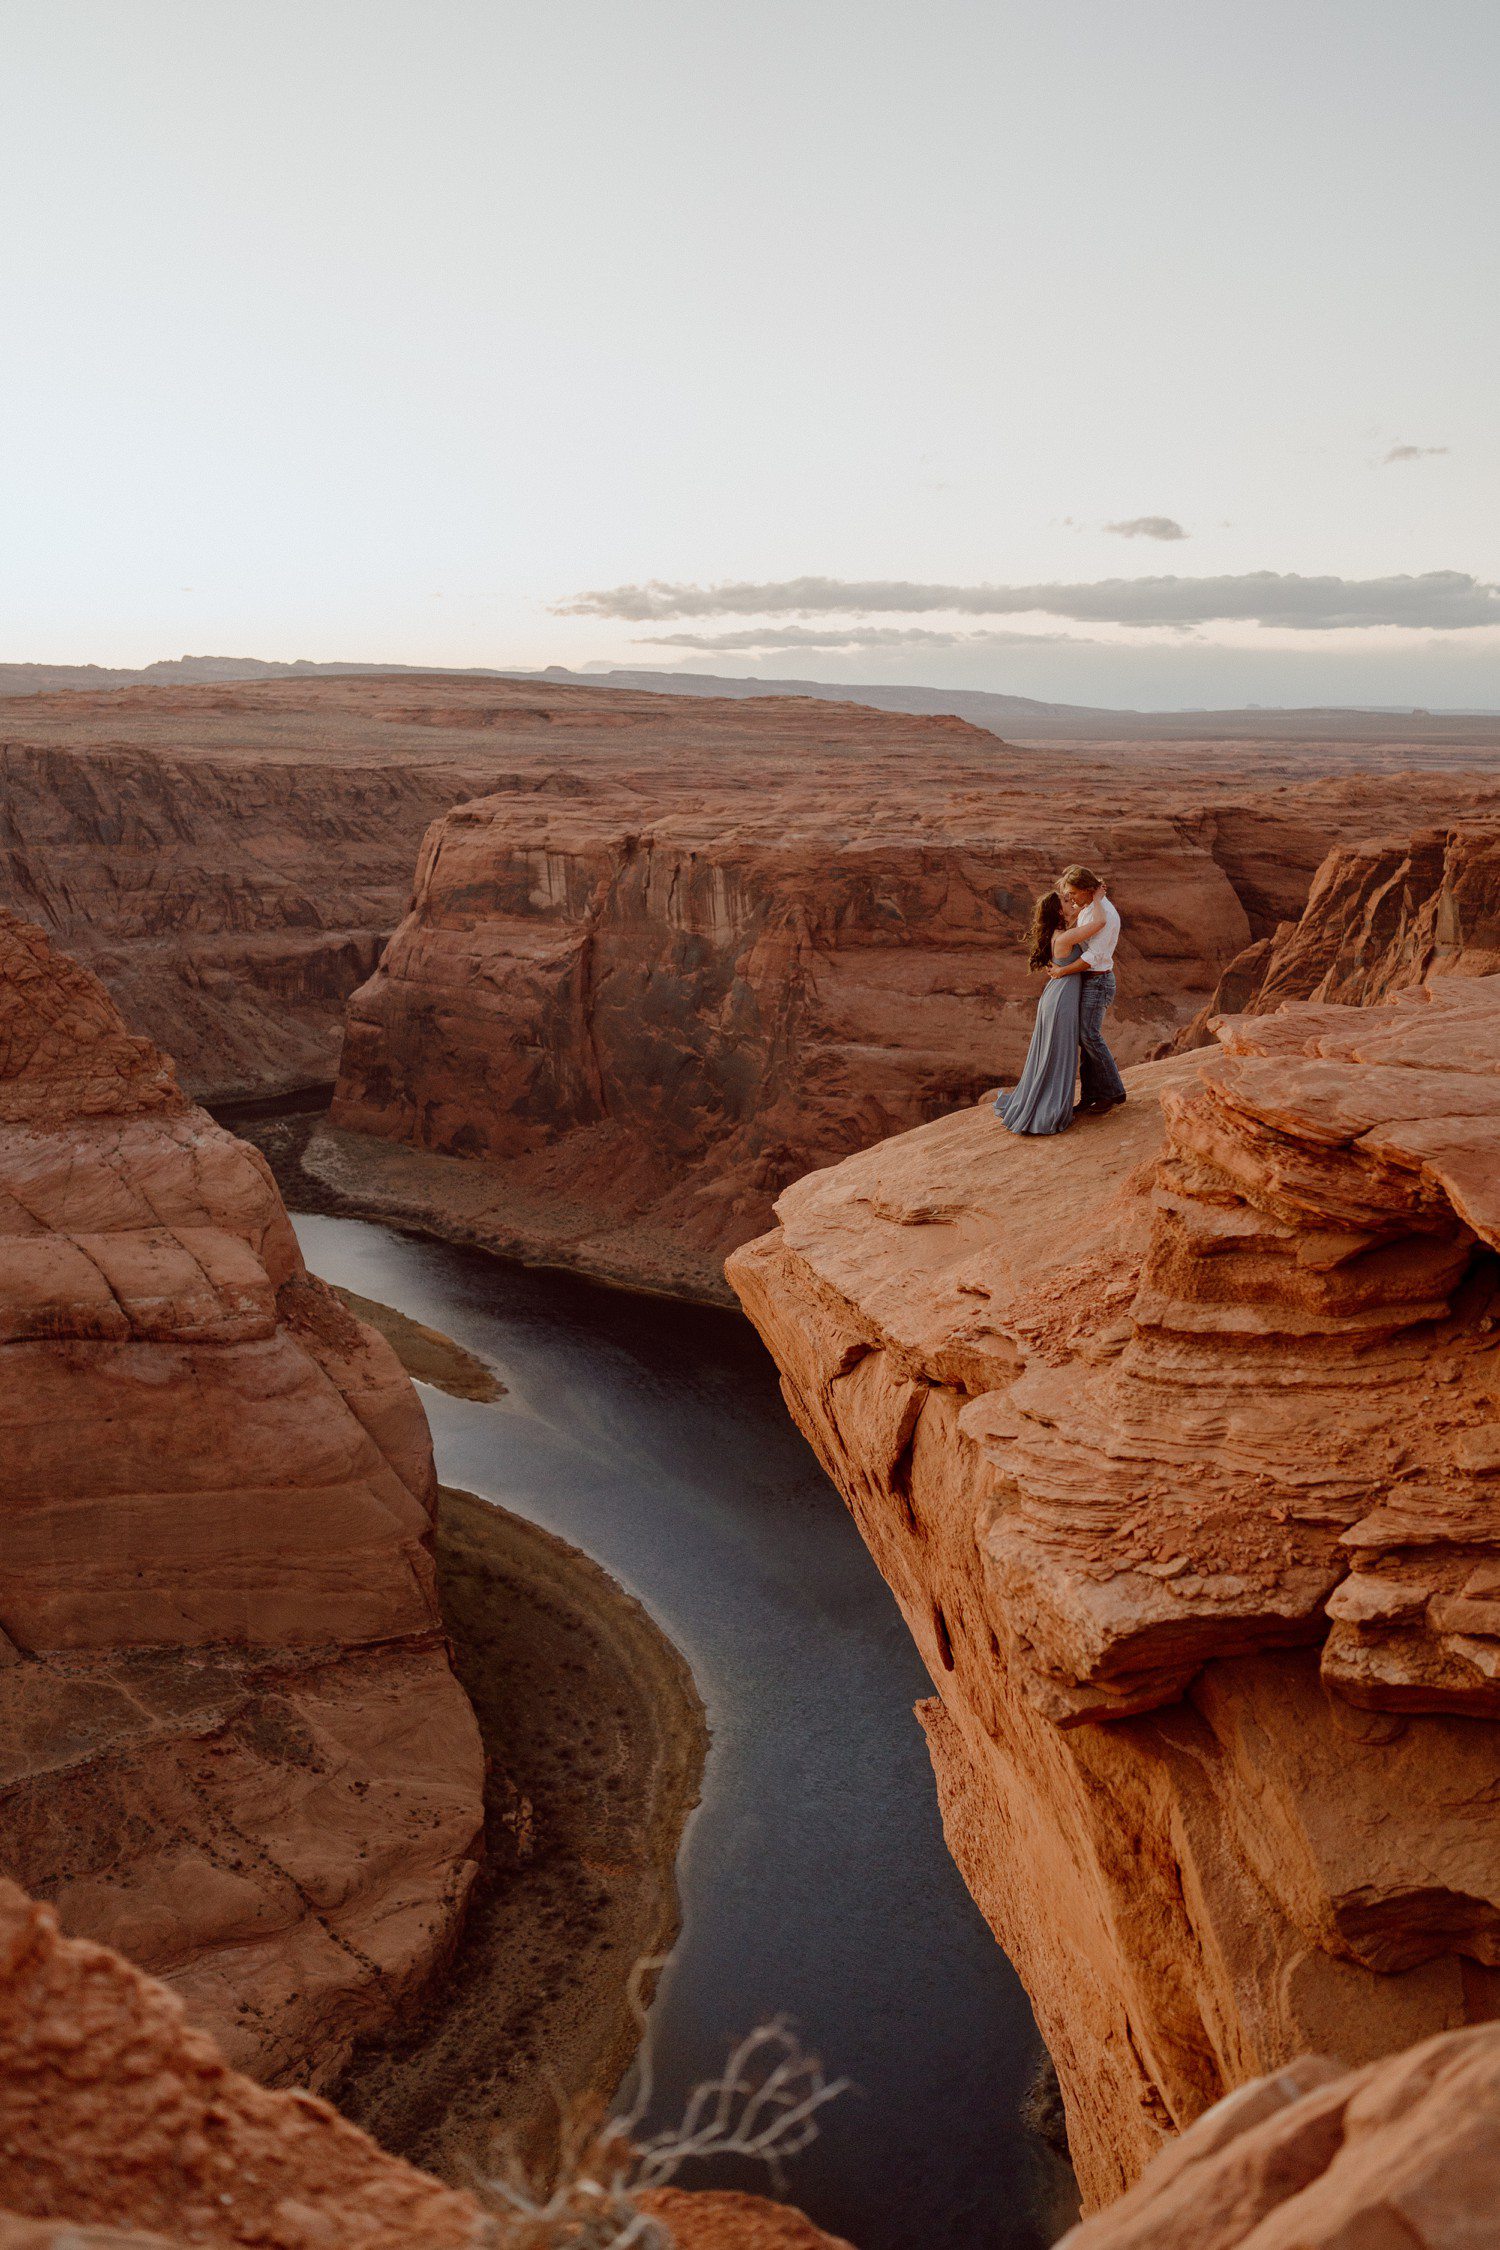 Couples Session at Horseshoe Bend